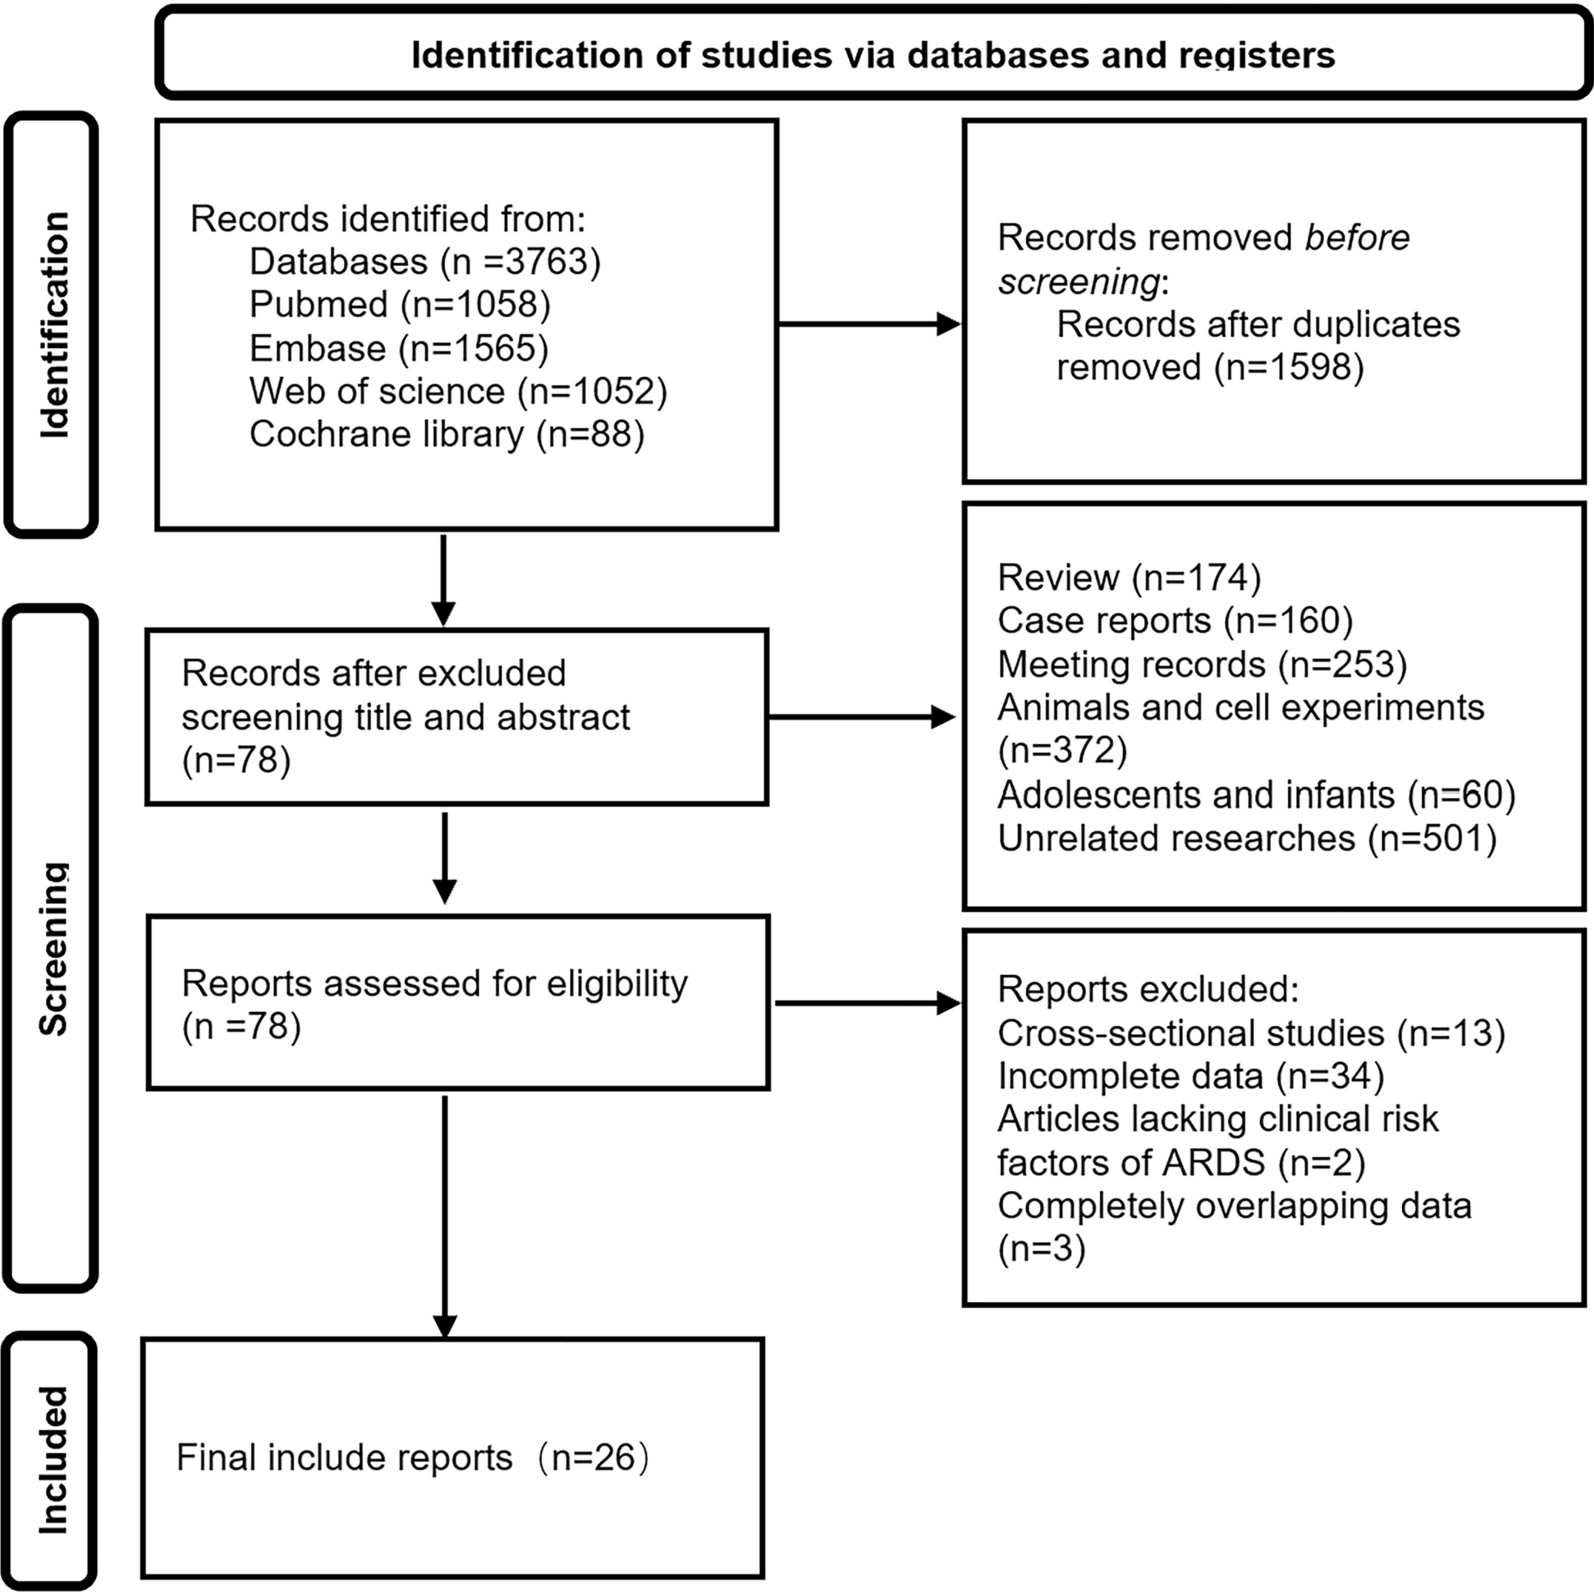 Smoking on the risk of acute respiratory distress syndrome: a systematic review and meta-analysis